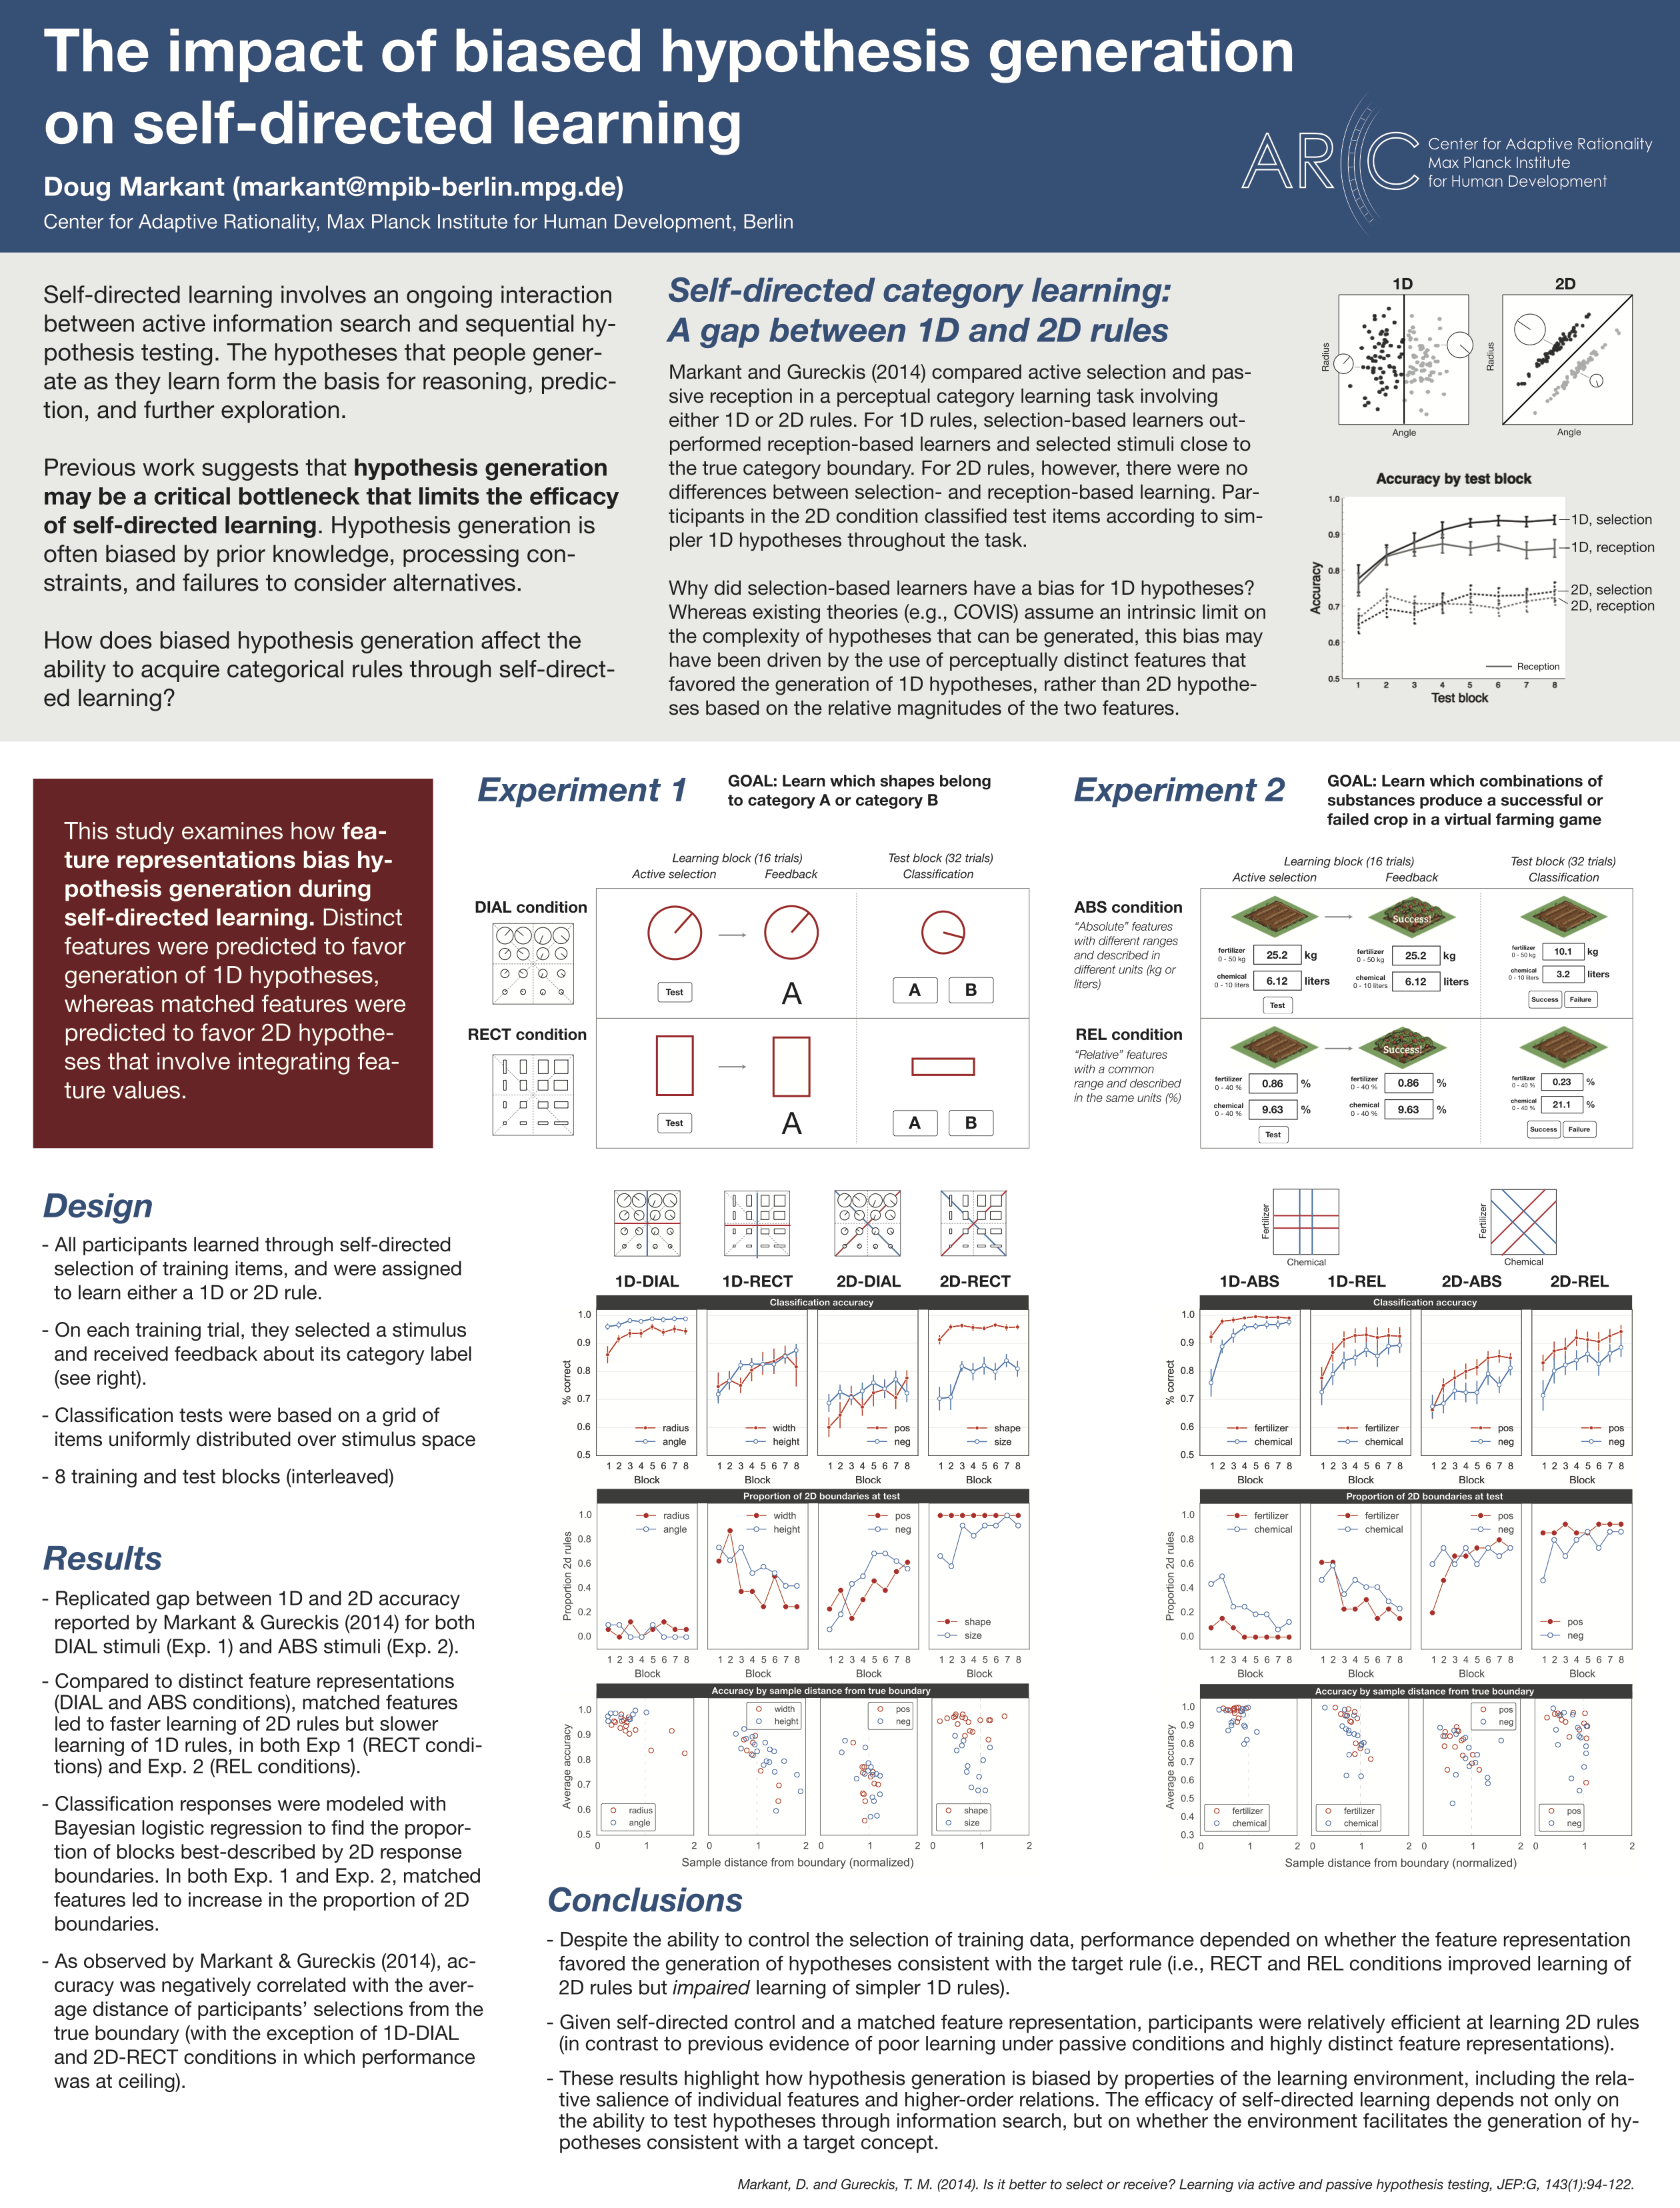 cogsci-poster